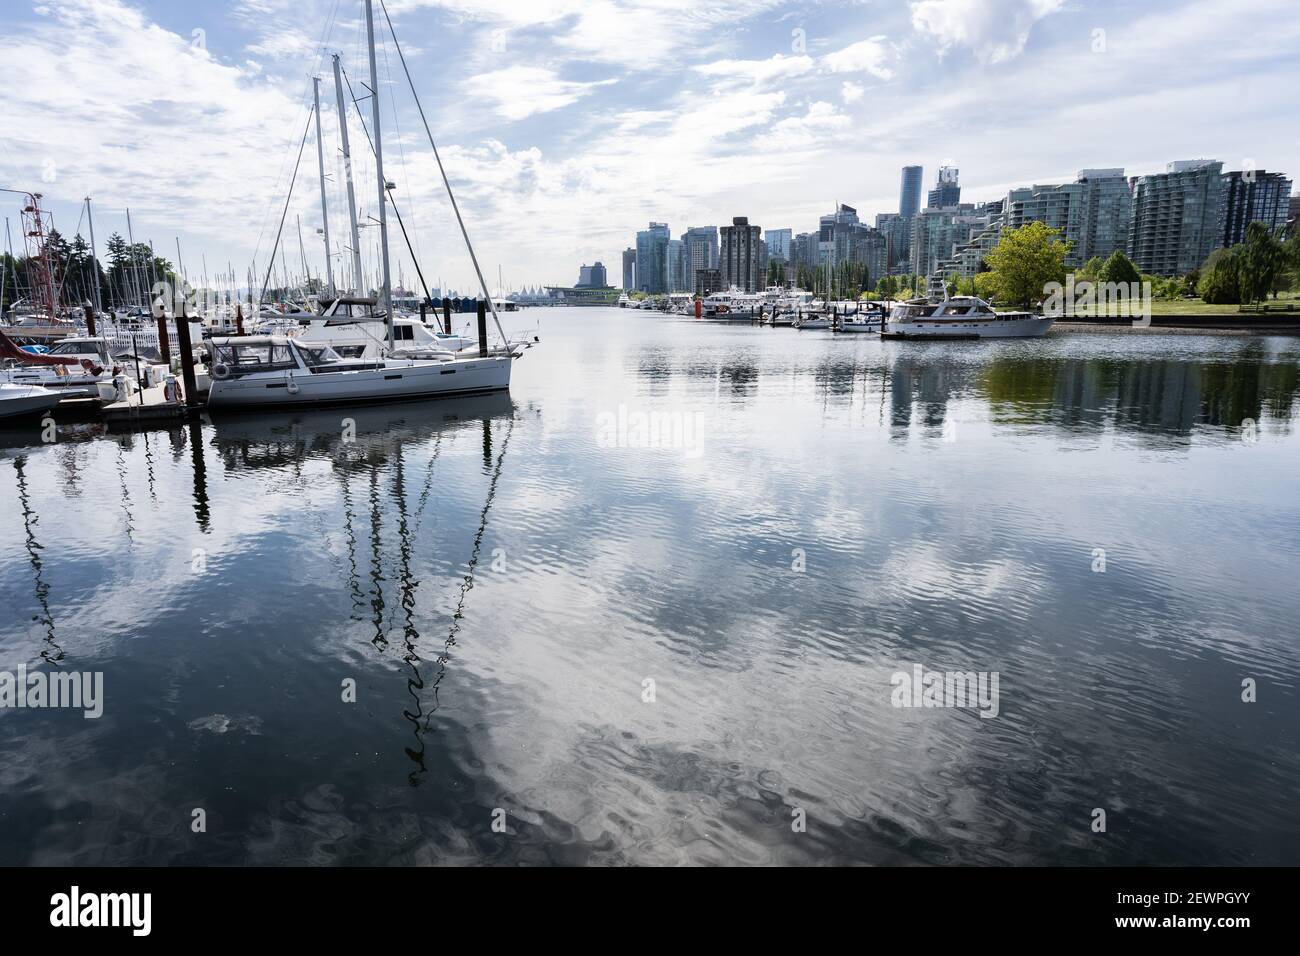 Harbor full of sailing boats with view on downtown, shot in Stanley Park, Vancouver, British Columbia, Canada Stock Photo